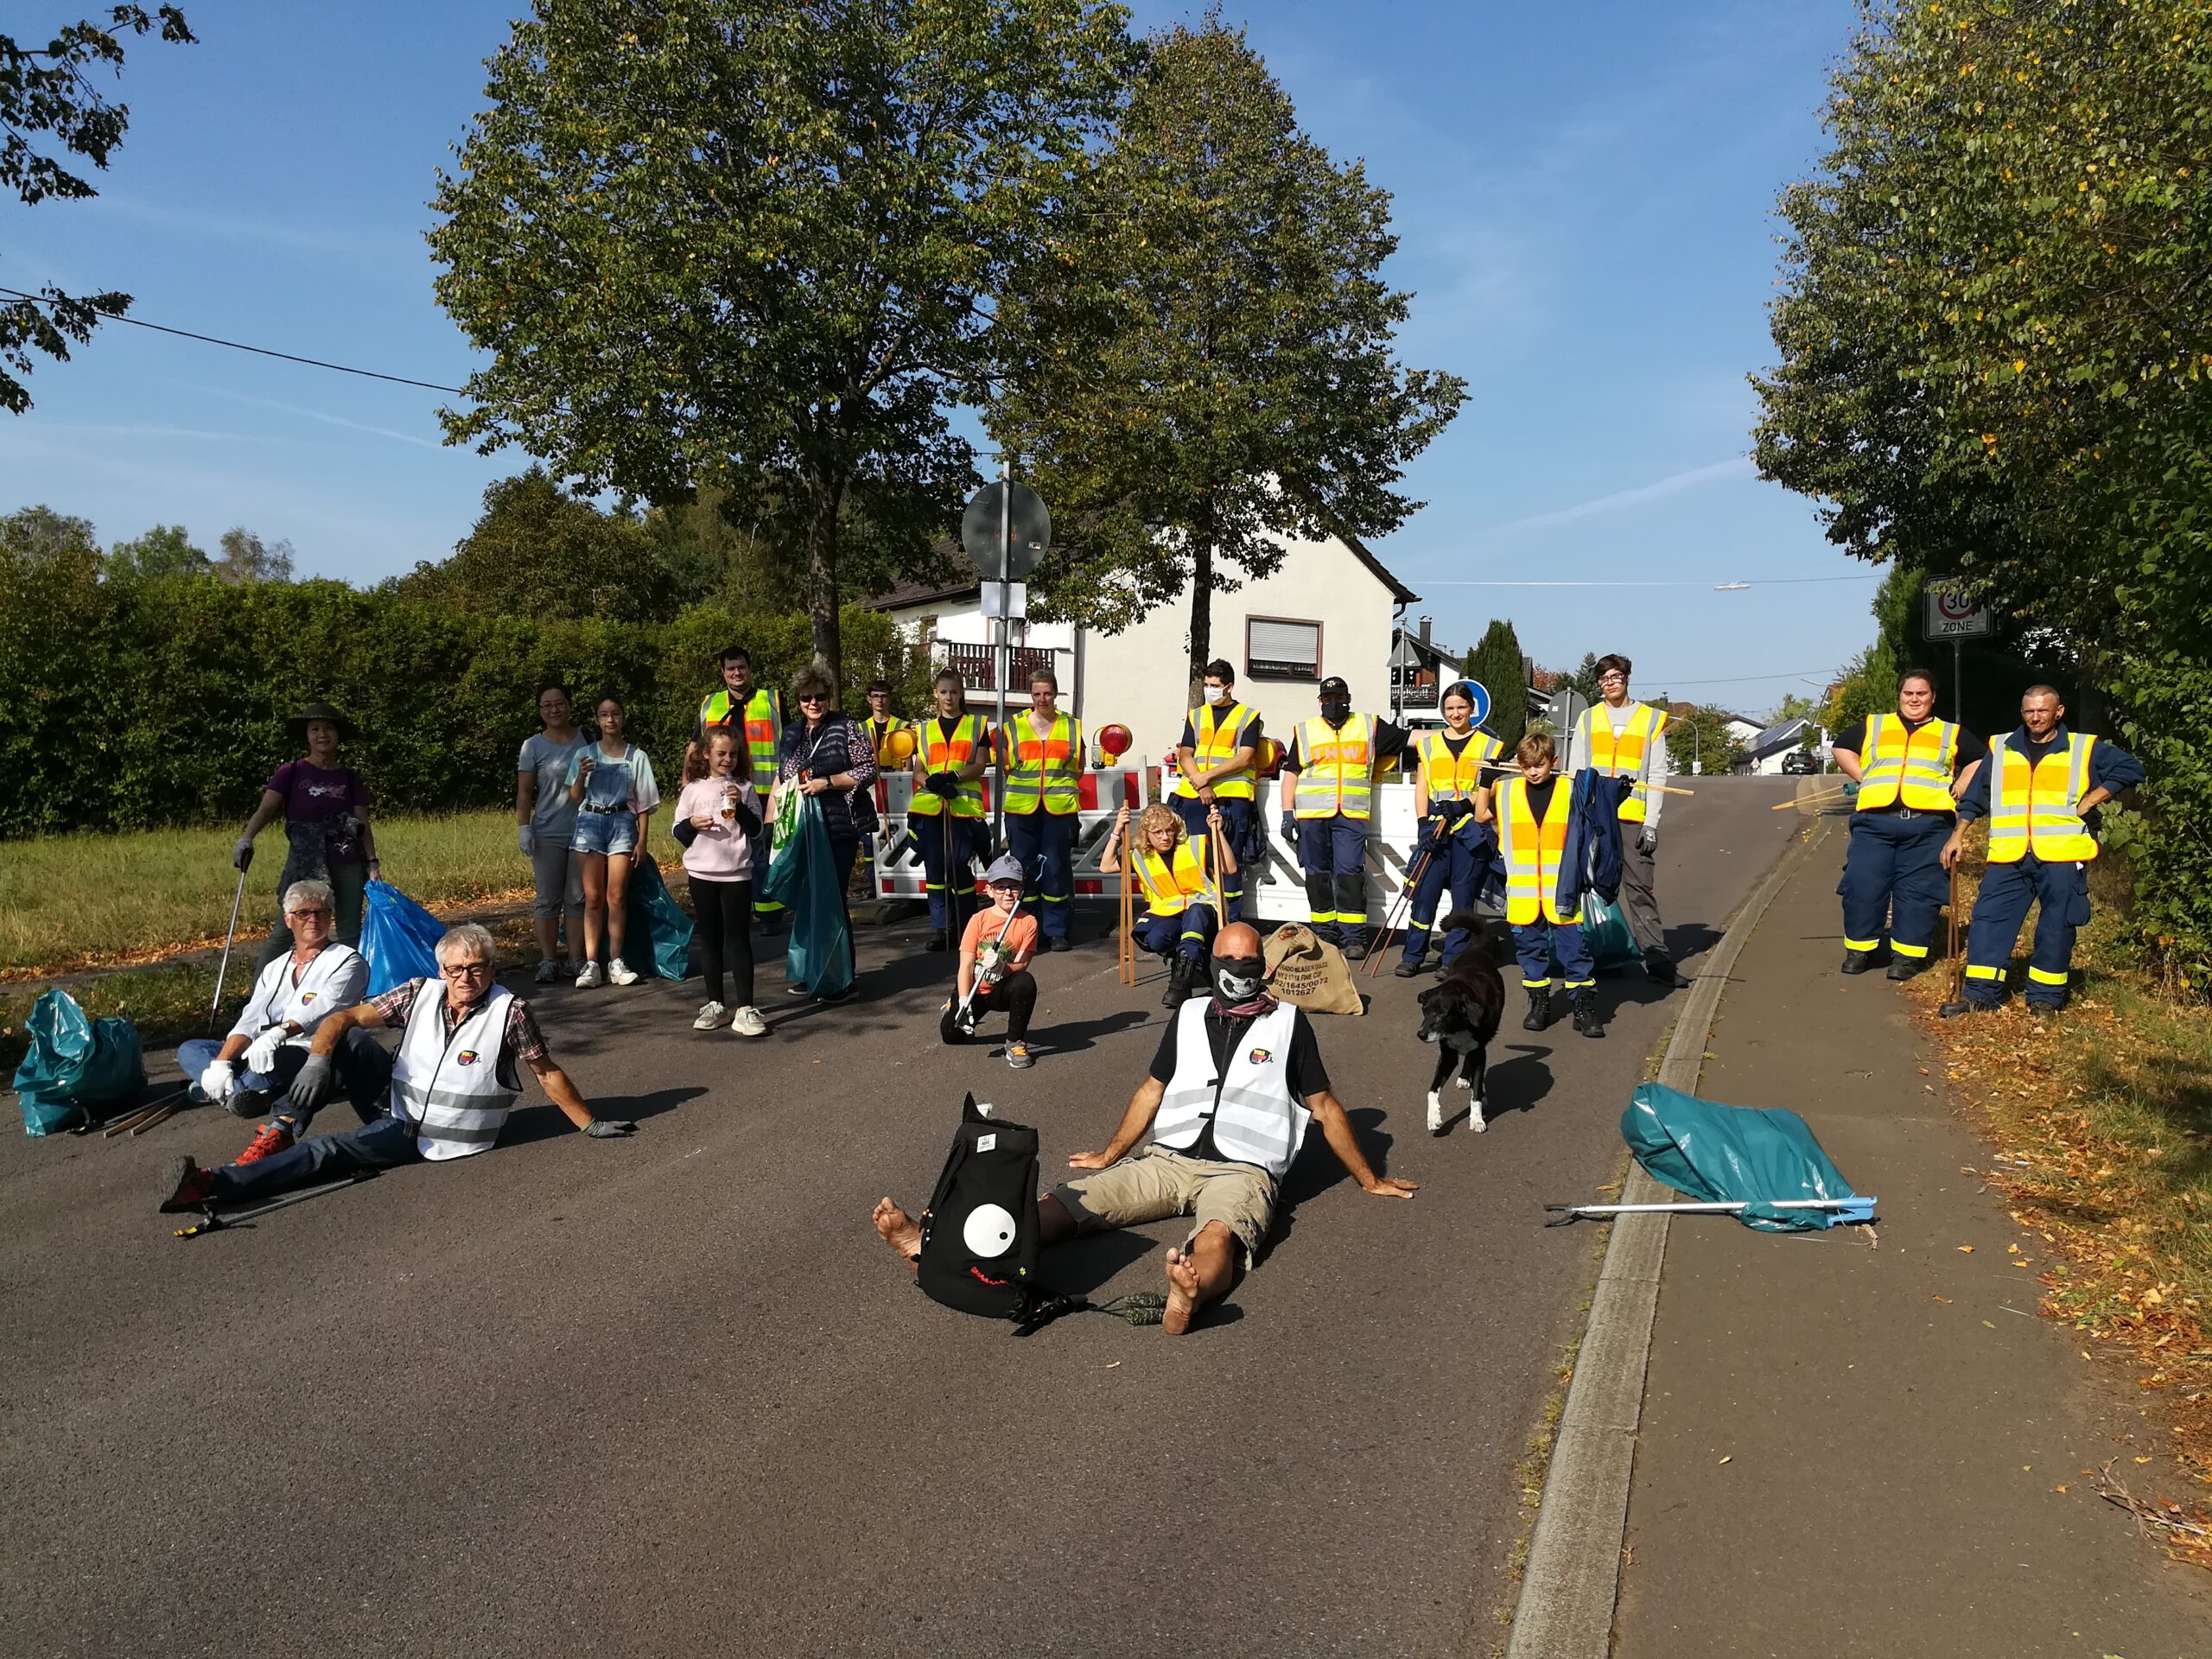 World Cleanup Day in Illingen